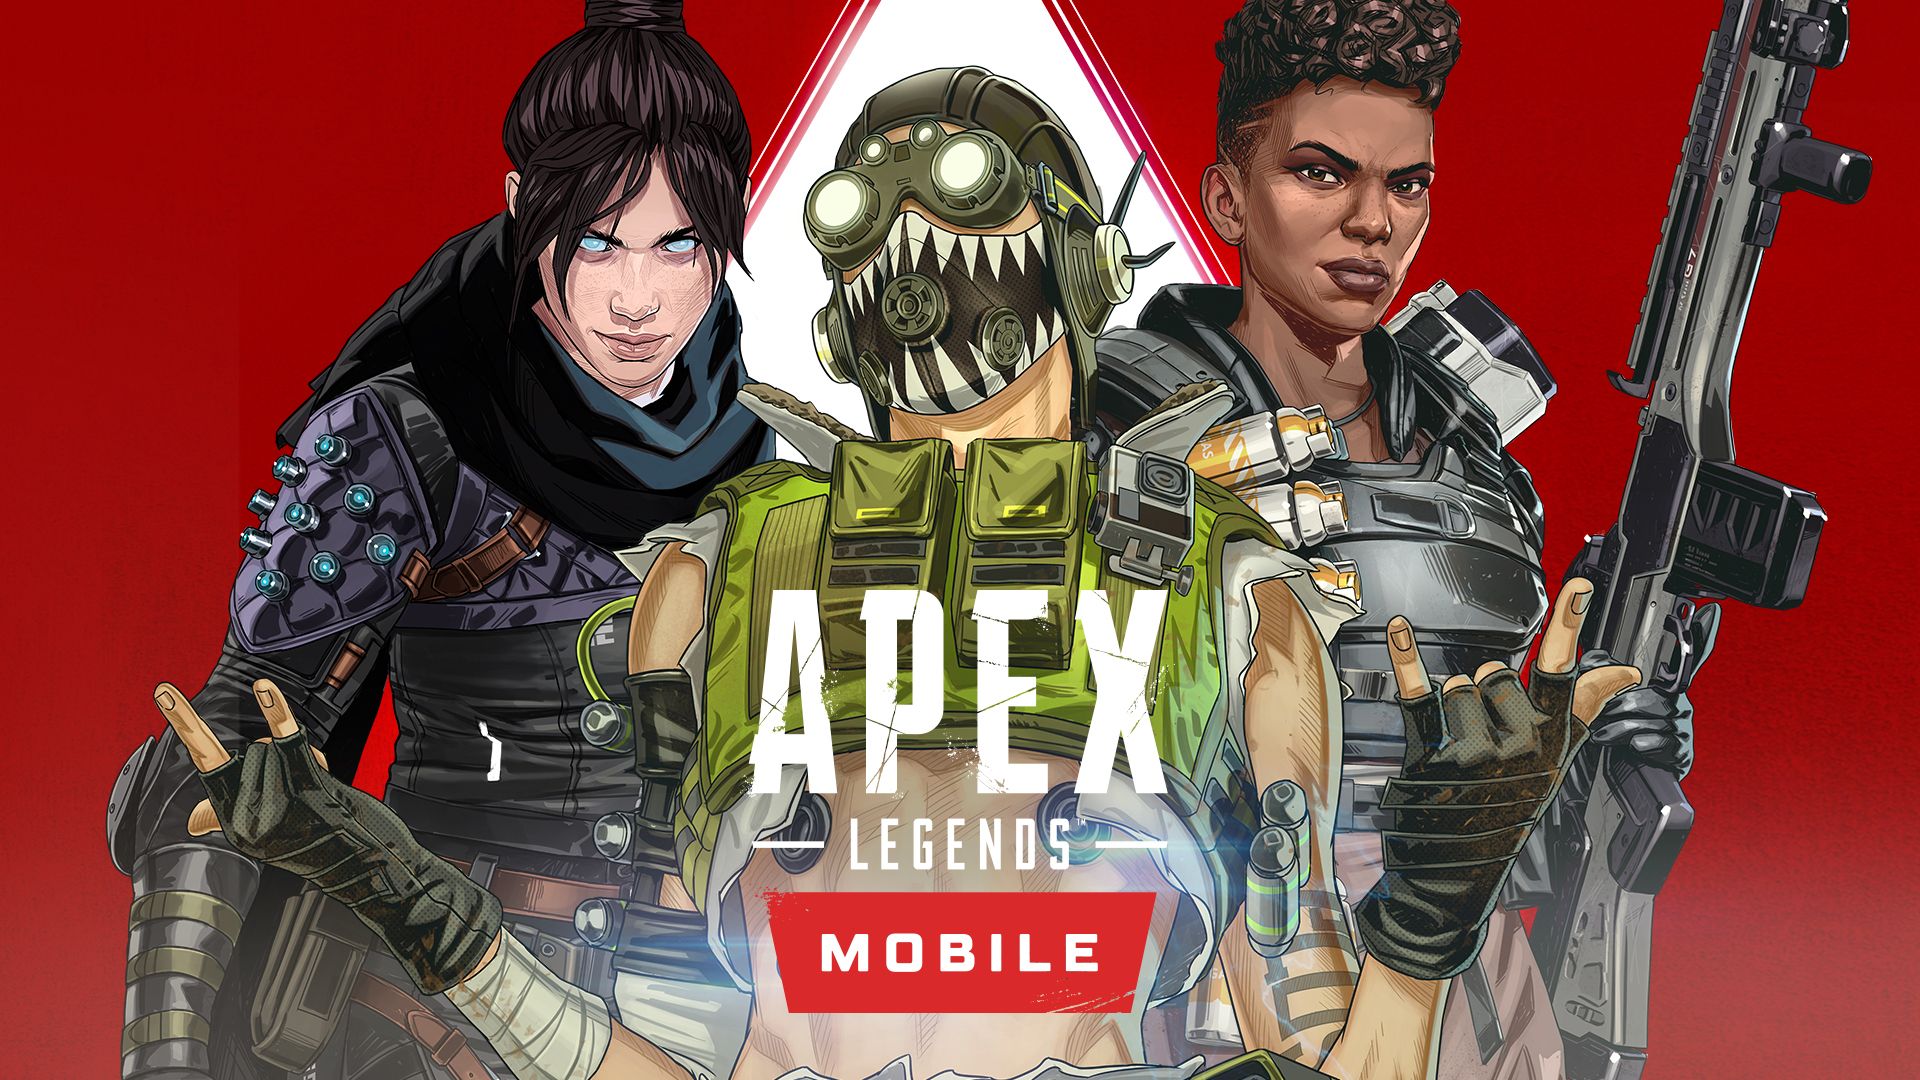 Apex Legends Mobile vs. Fortnite, CoD Mobile, and PUBG Mobile: Which battle royale wins?, The Gift Card Mayor, thegiftcardmayor.com